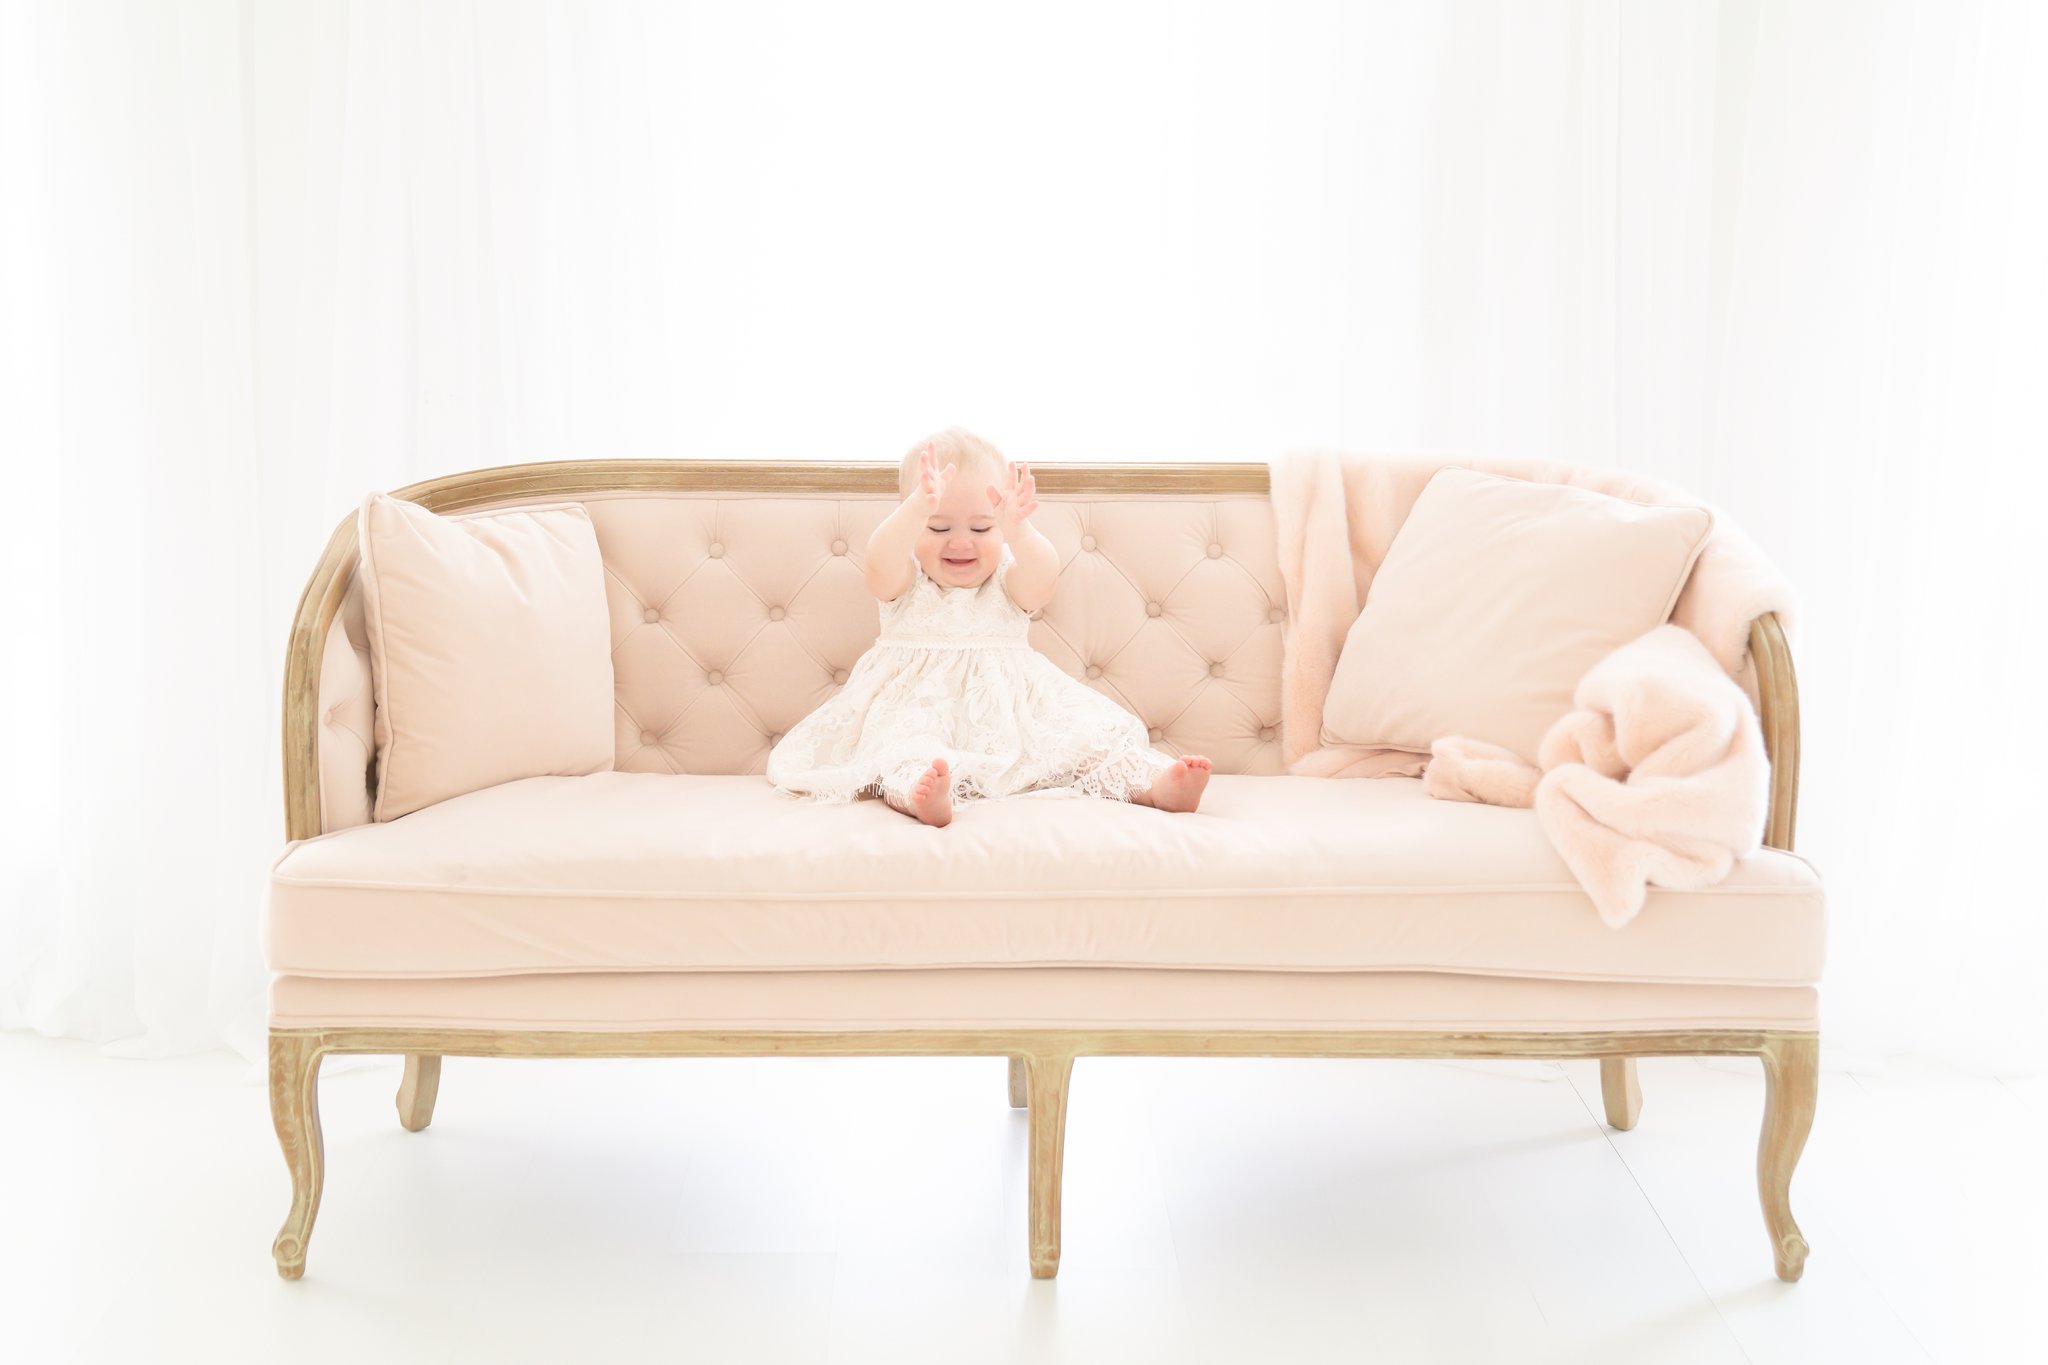 One year old in her christening gown on pink velvet couch